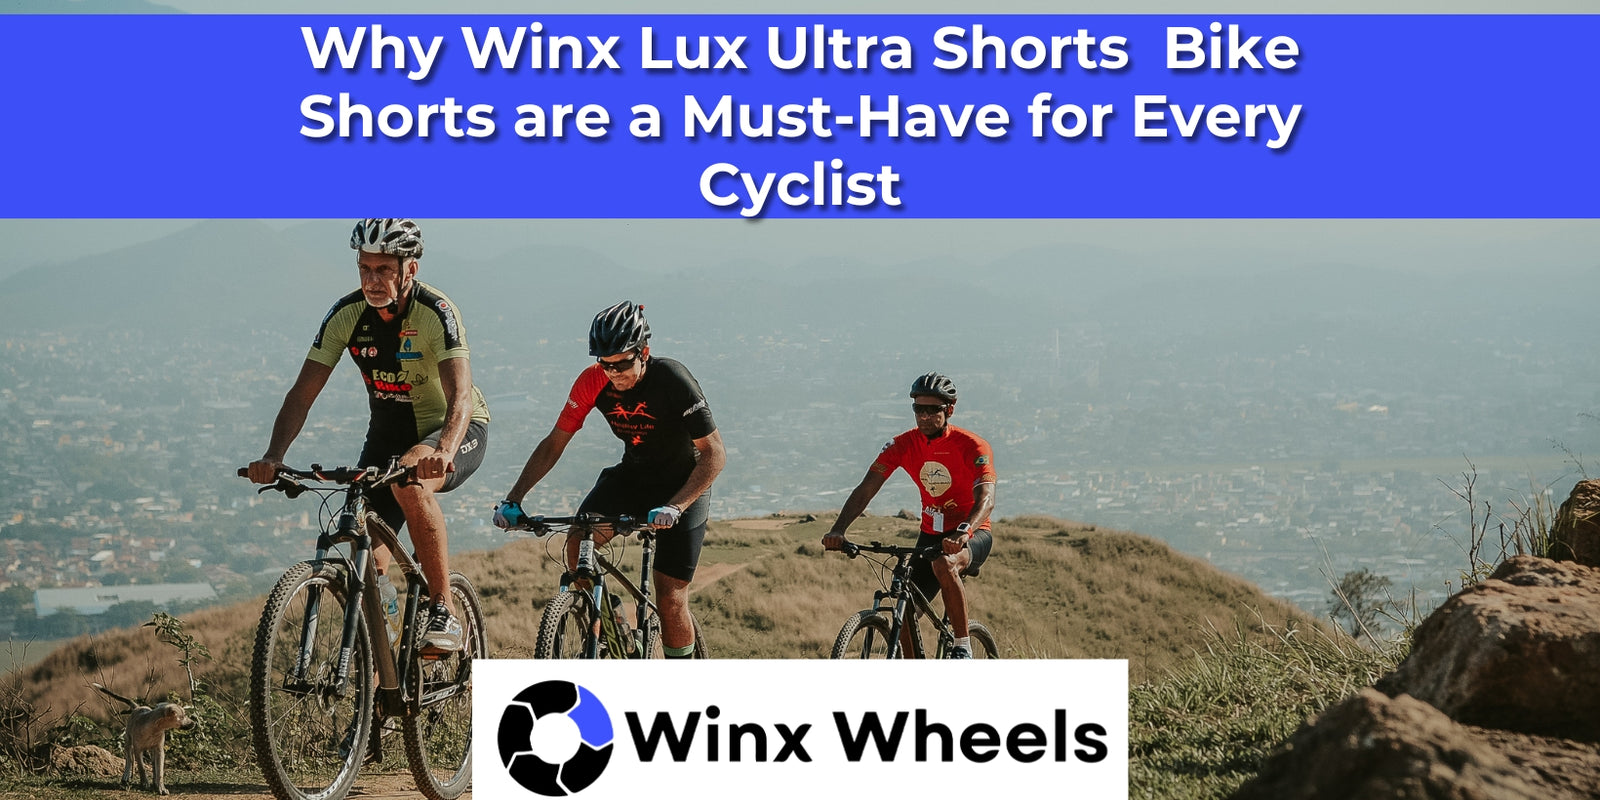 Why Winx Lux Ultra Shorts  Bike Shorts are a Must-Have for Every Cyclist